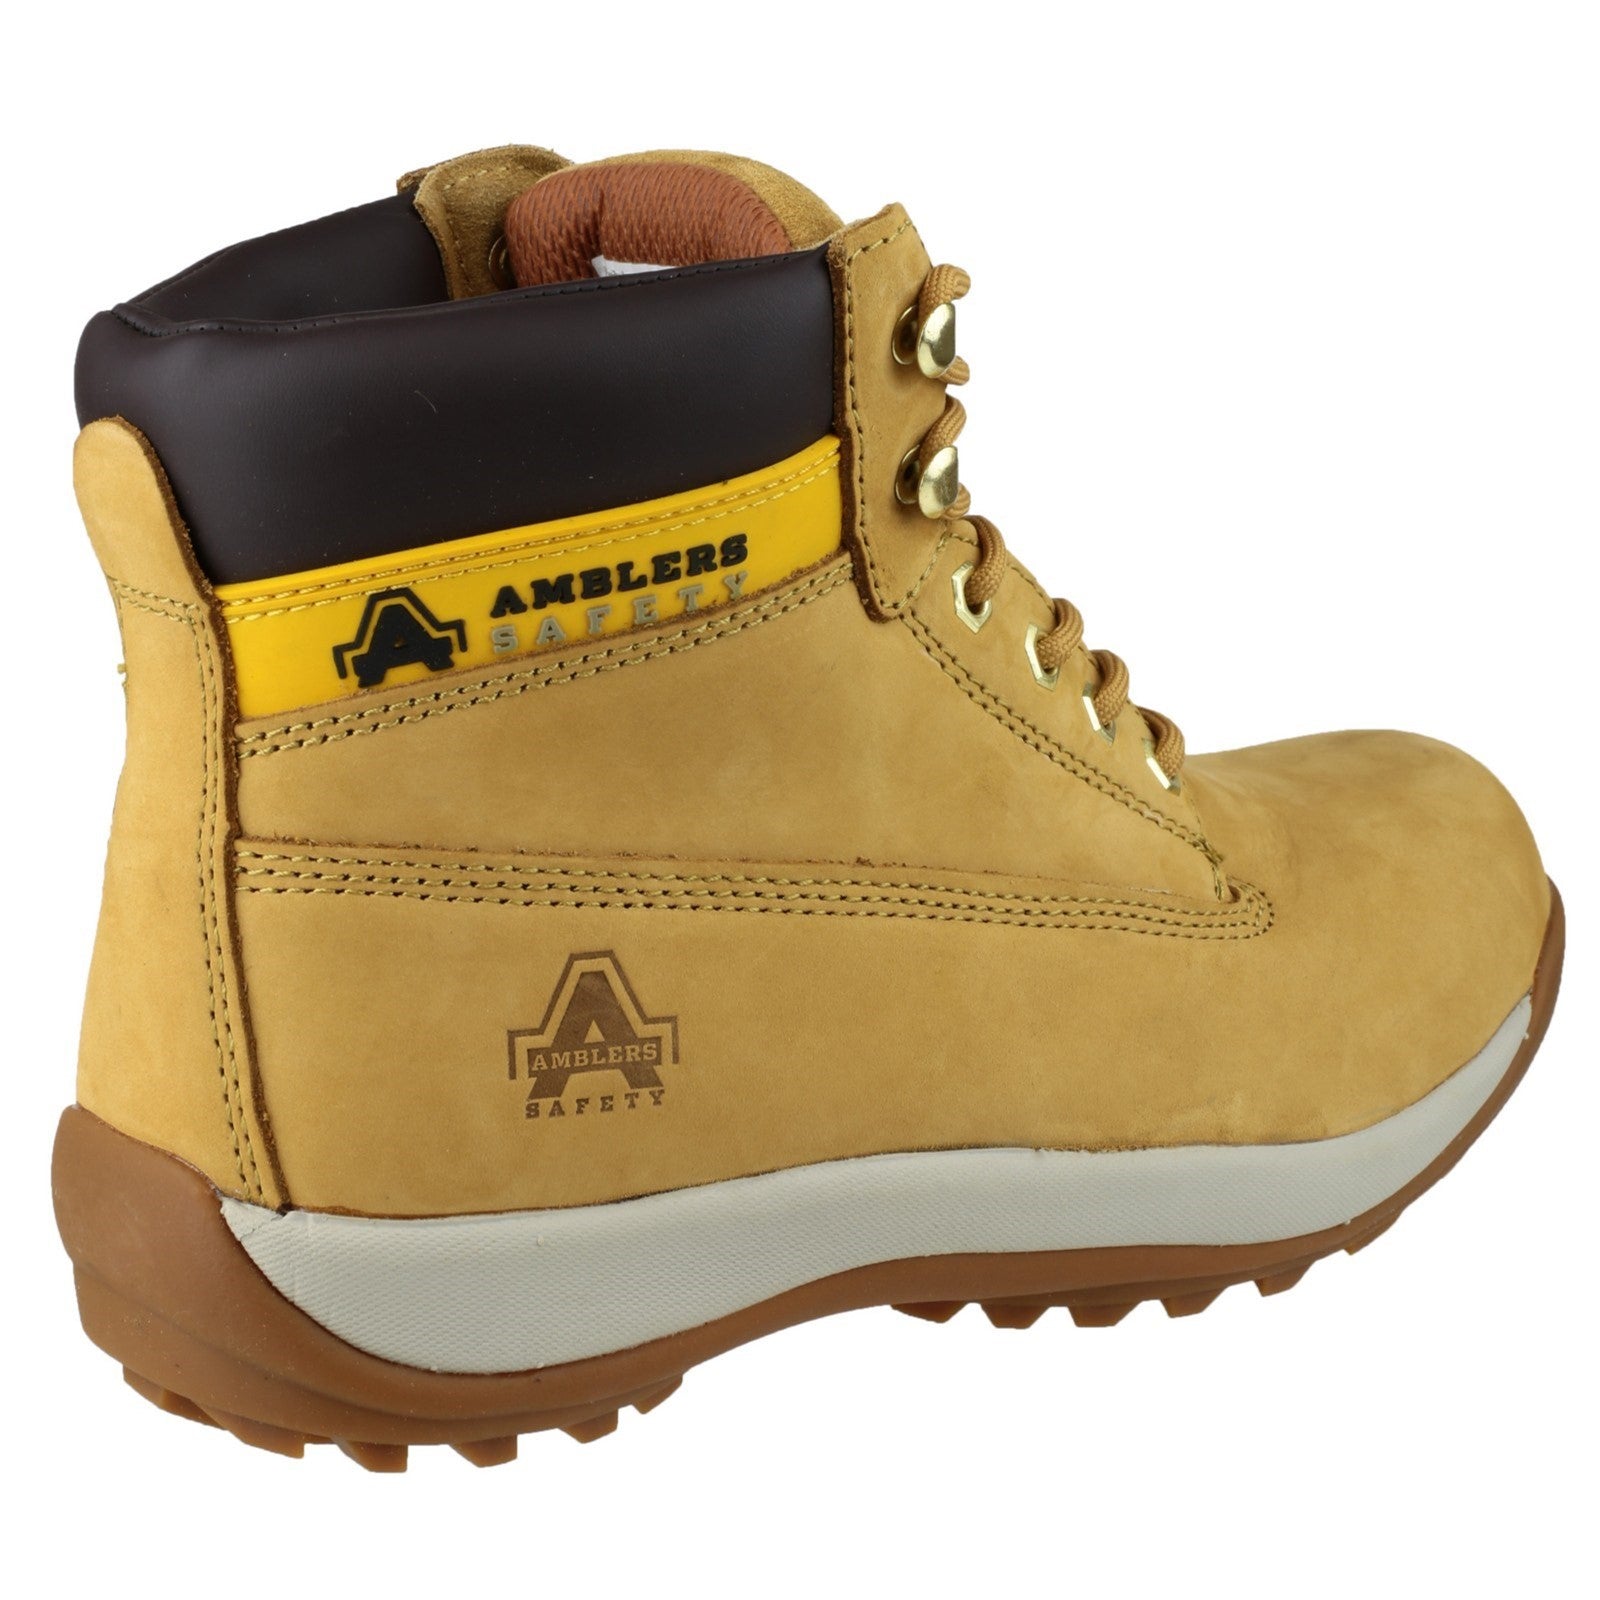 Amblers FS102 Safety Boot